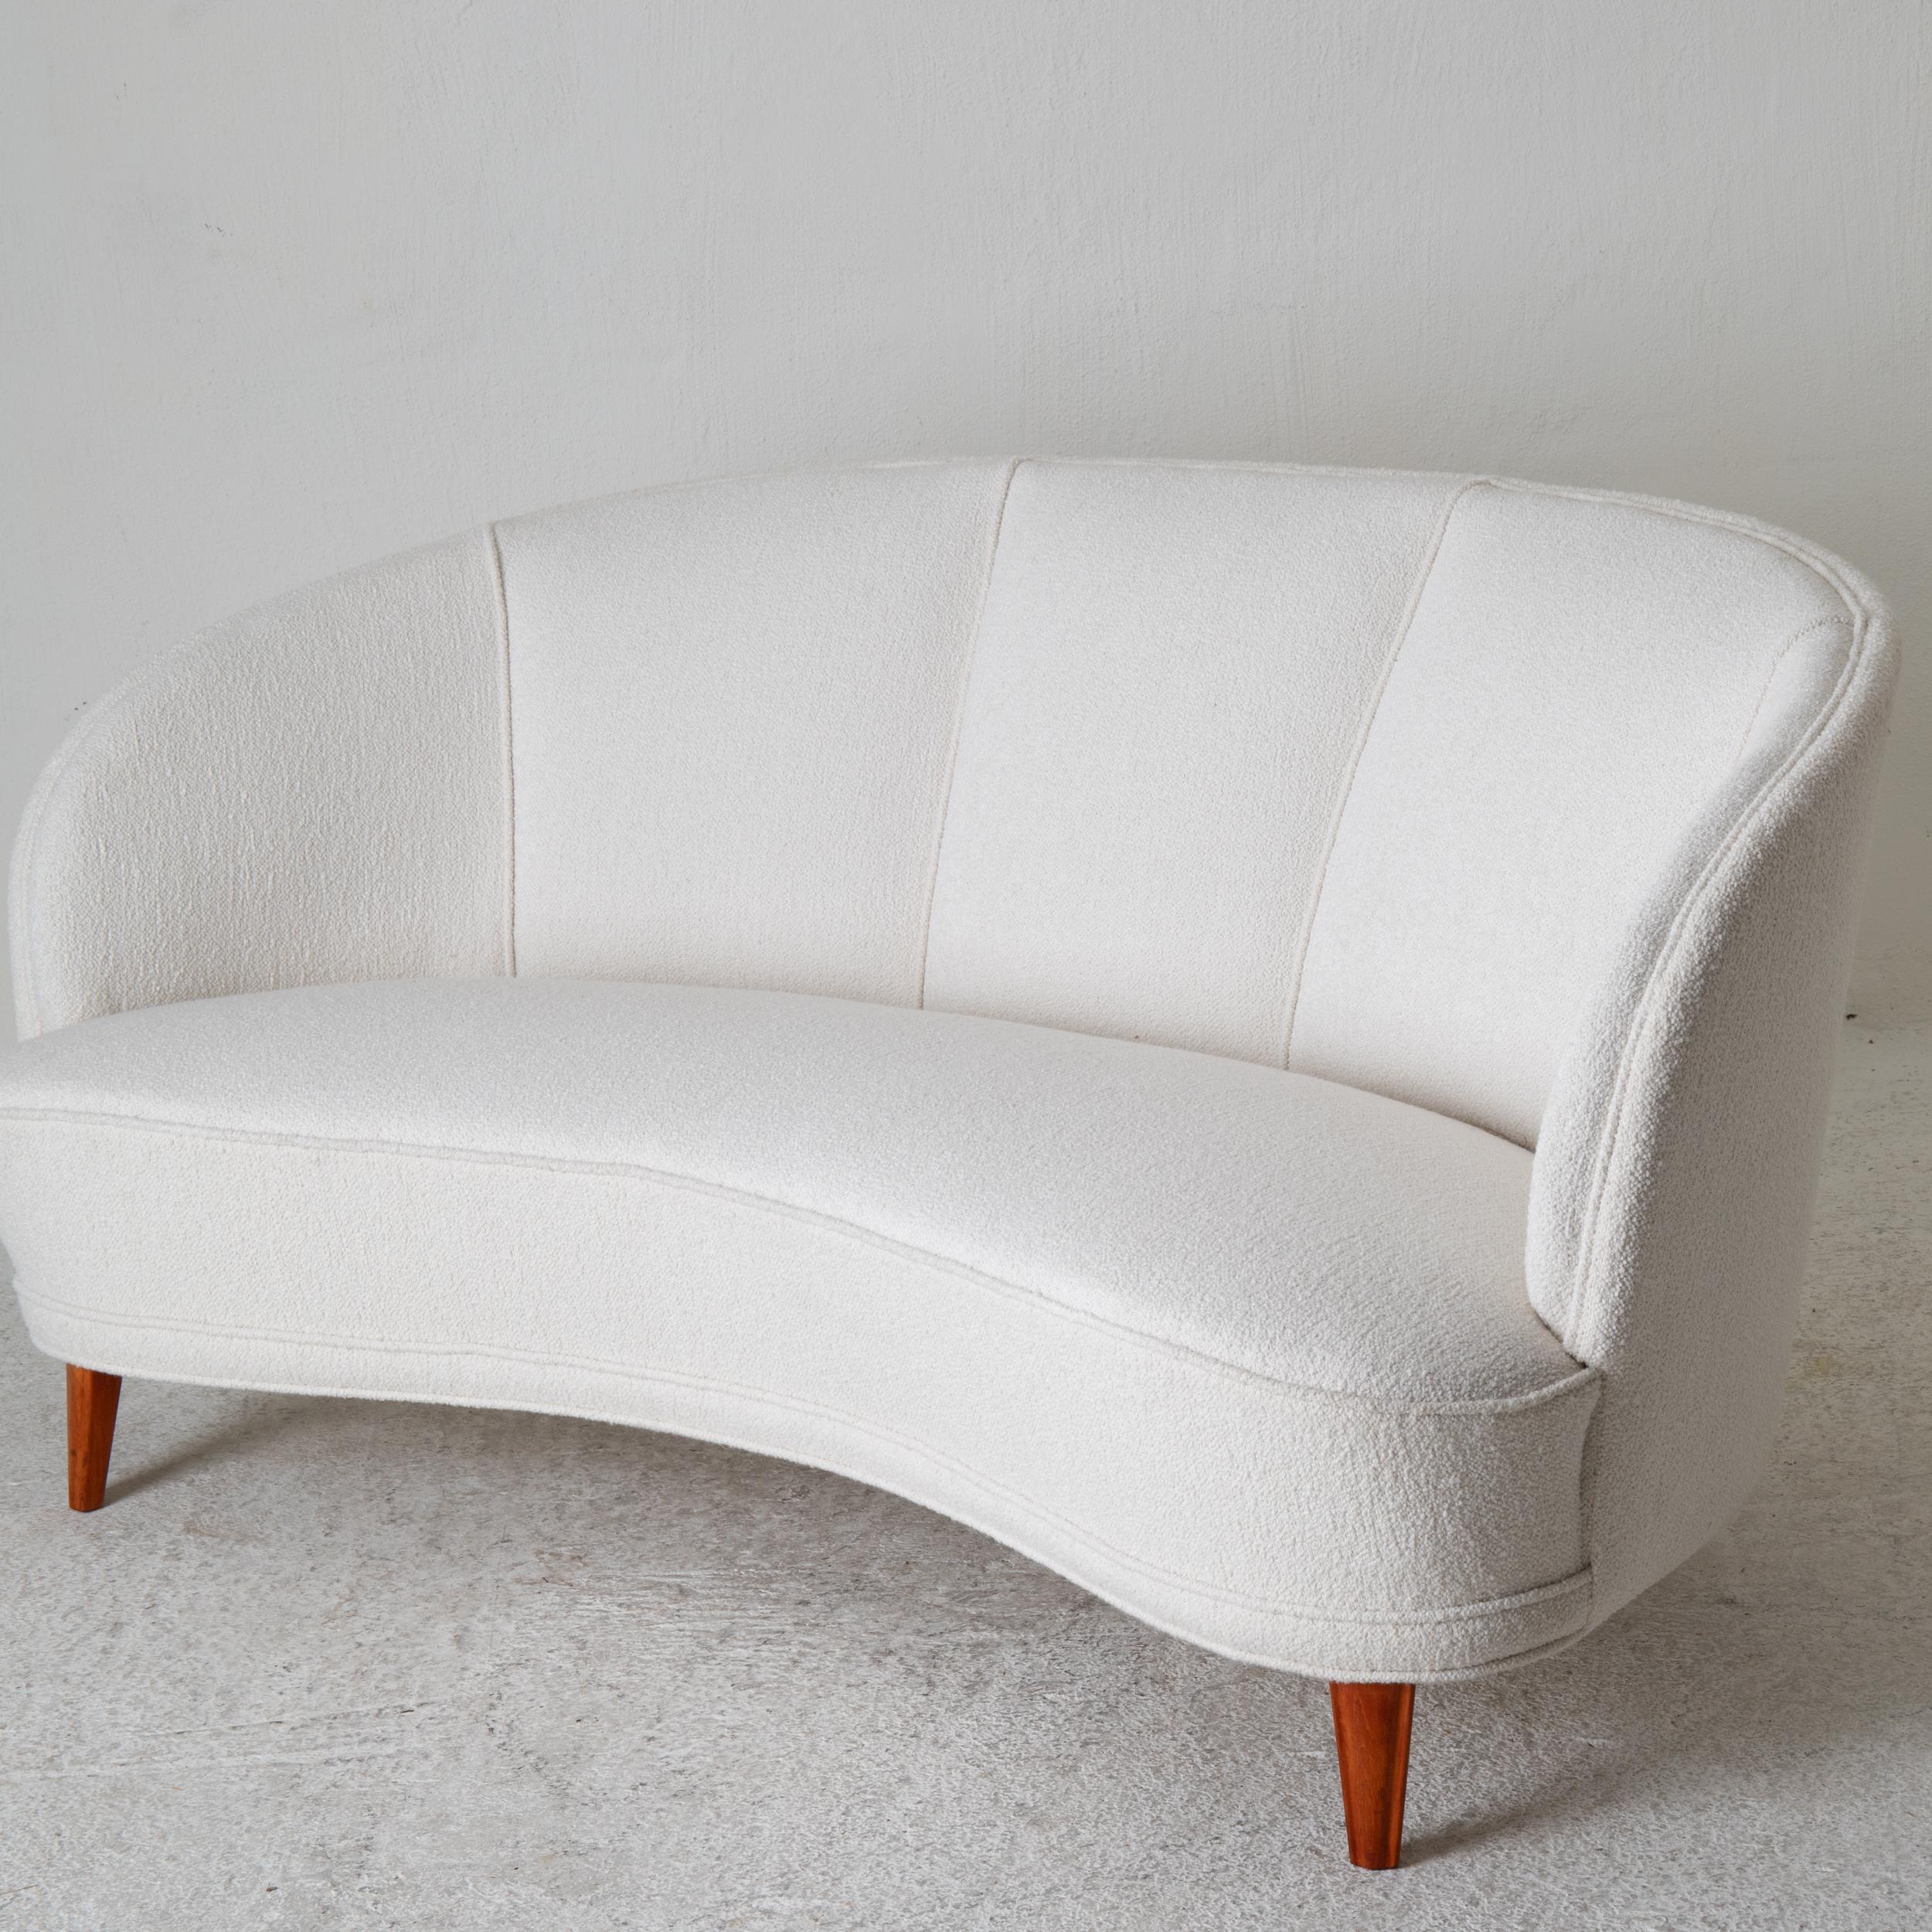 Sofa curved Swedish 20th century white, Sweden. A curved sofa made during the midcentury in Sweden. Upholstered in a white boucle fabric with piping details.

 